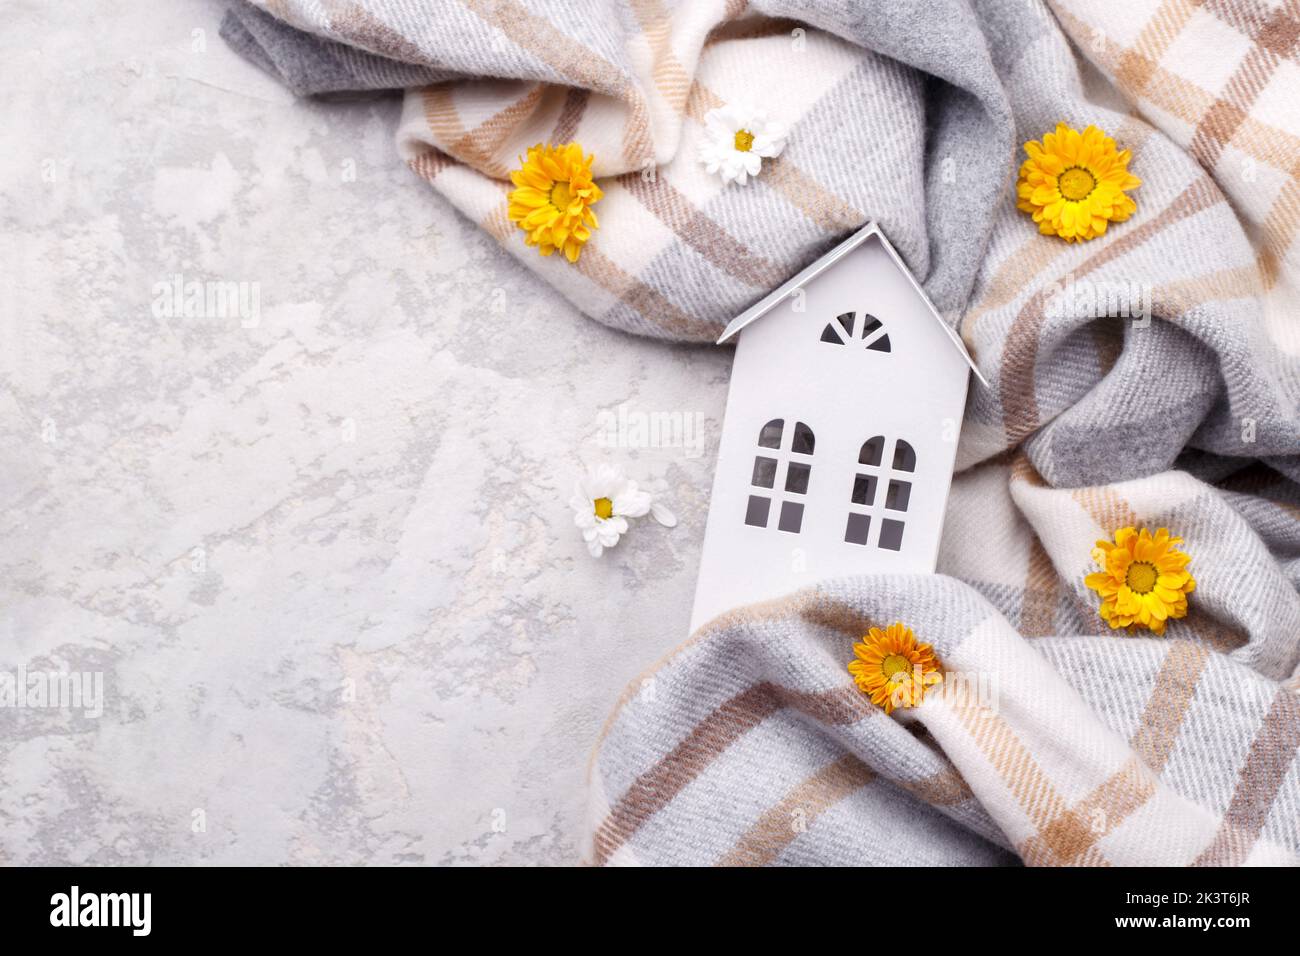 White toy house and yellow flowers on the plaid, autumn cozy concept, horizontal Stock Photo